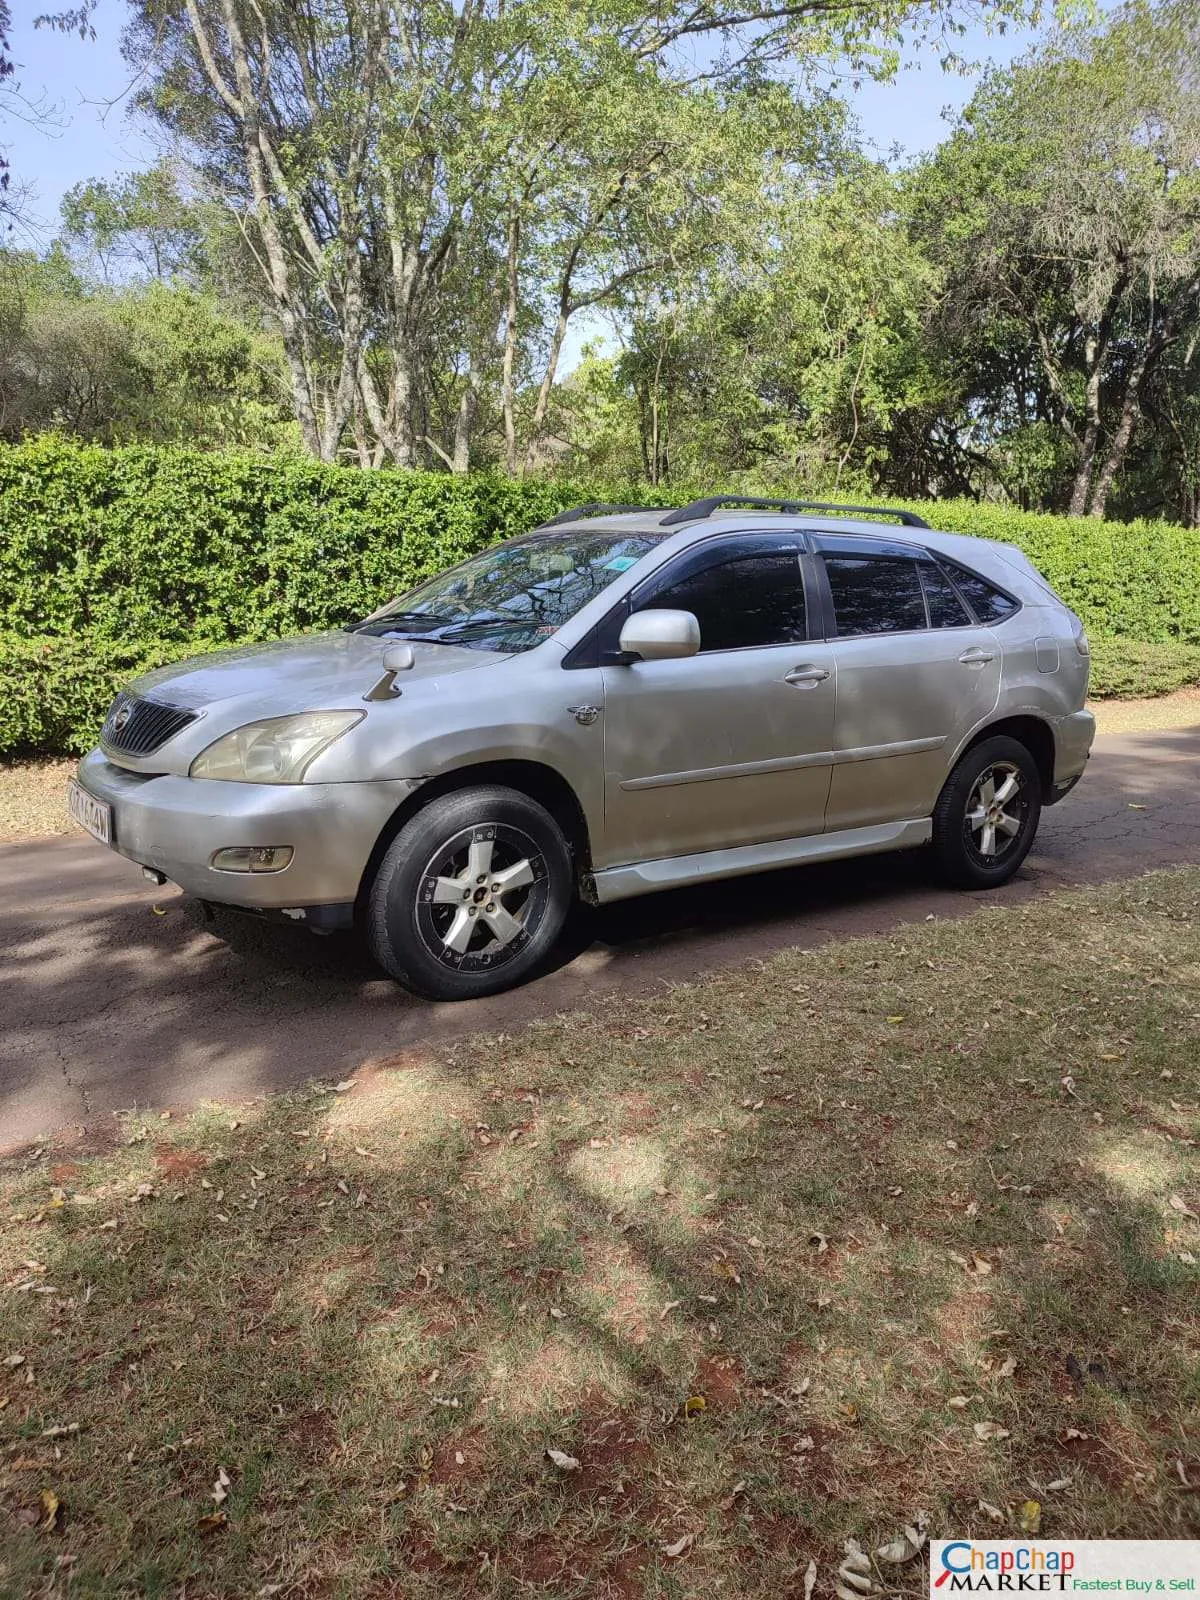 Cars Cars For Sale/Vehicles-Toyota Harrier 700k ONLY You Pay 30% Deposit 70% installments Trade in OK EXCLUSIVE 9